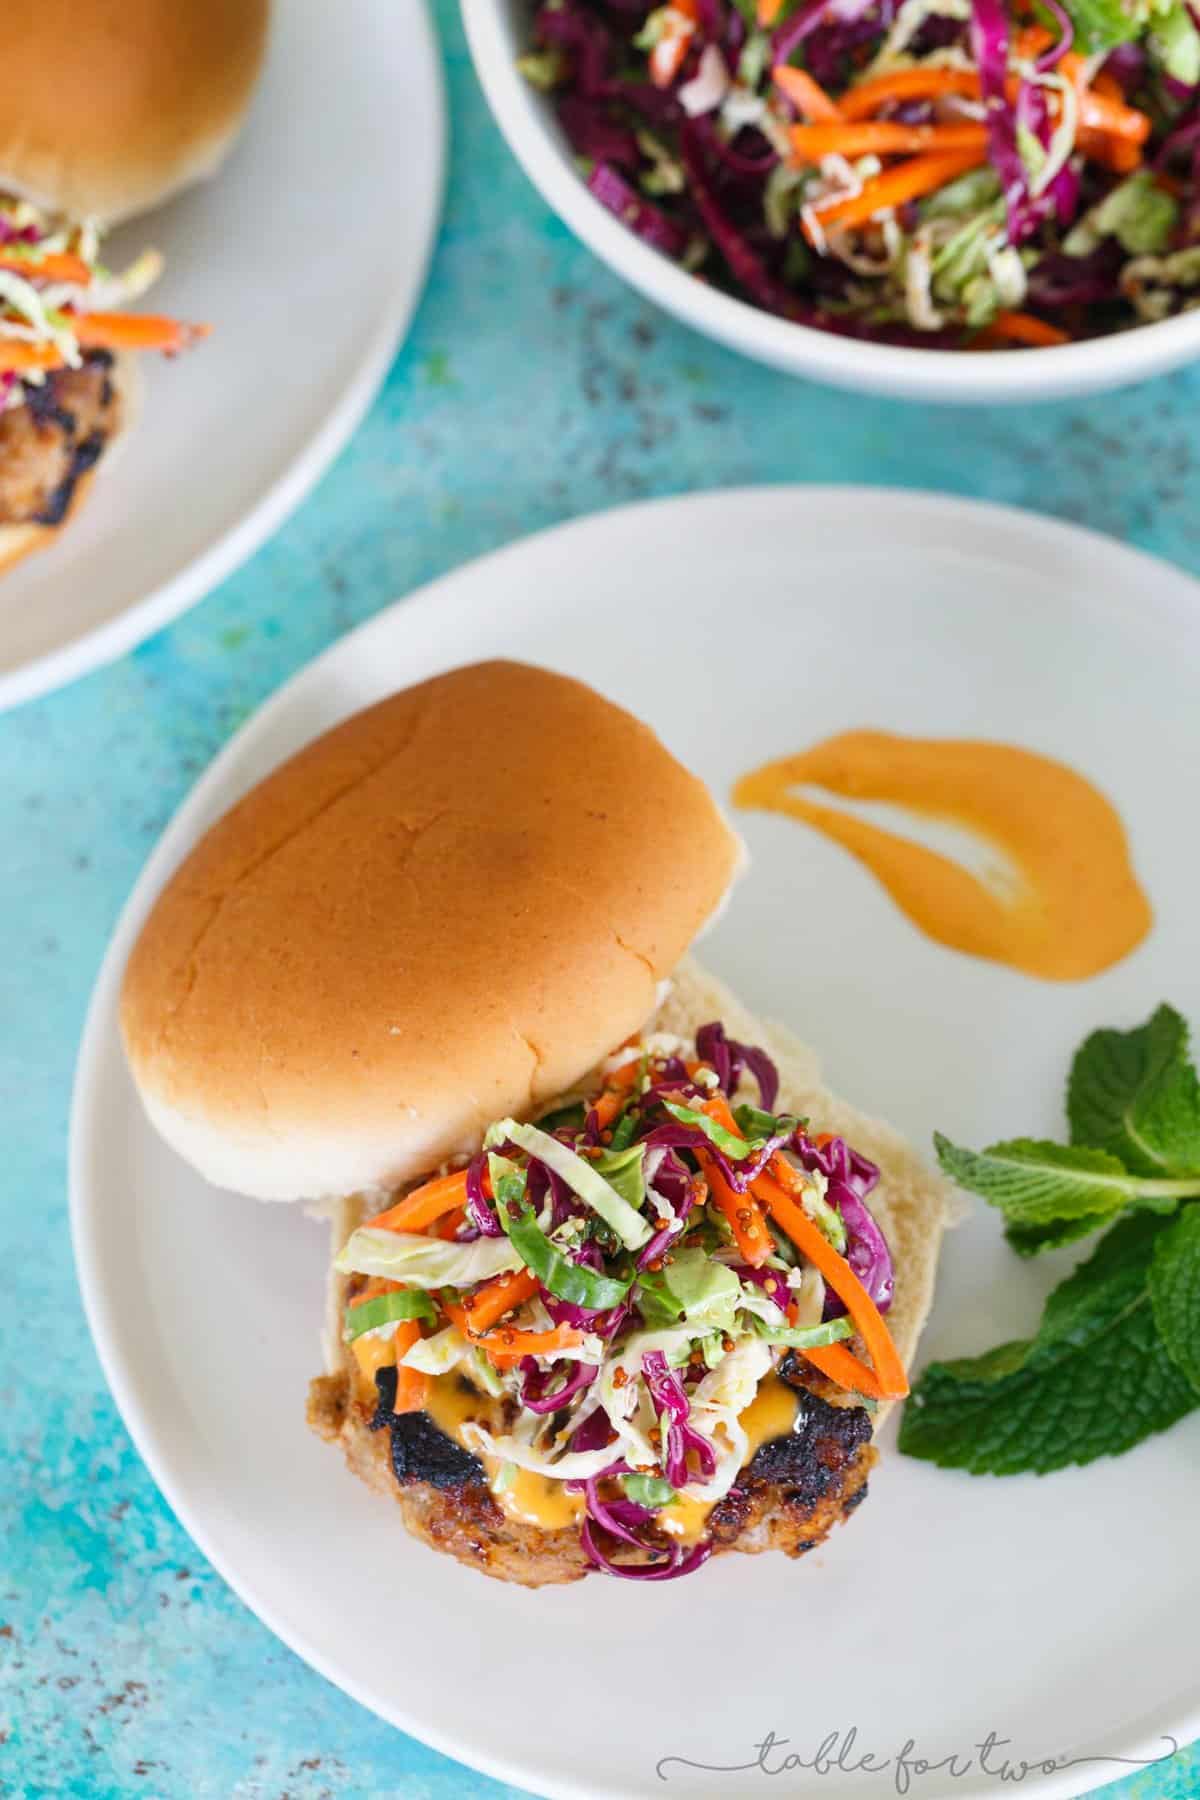 These lemongrass pork burgers offer an aromatic profile of citrus and spice! You will love how fragrant the flavors are and your tastebuds will be rejoicing! A great burger option when you're tired of the same old, same old.